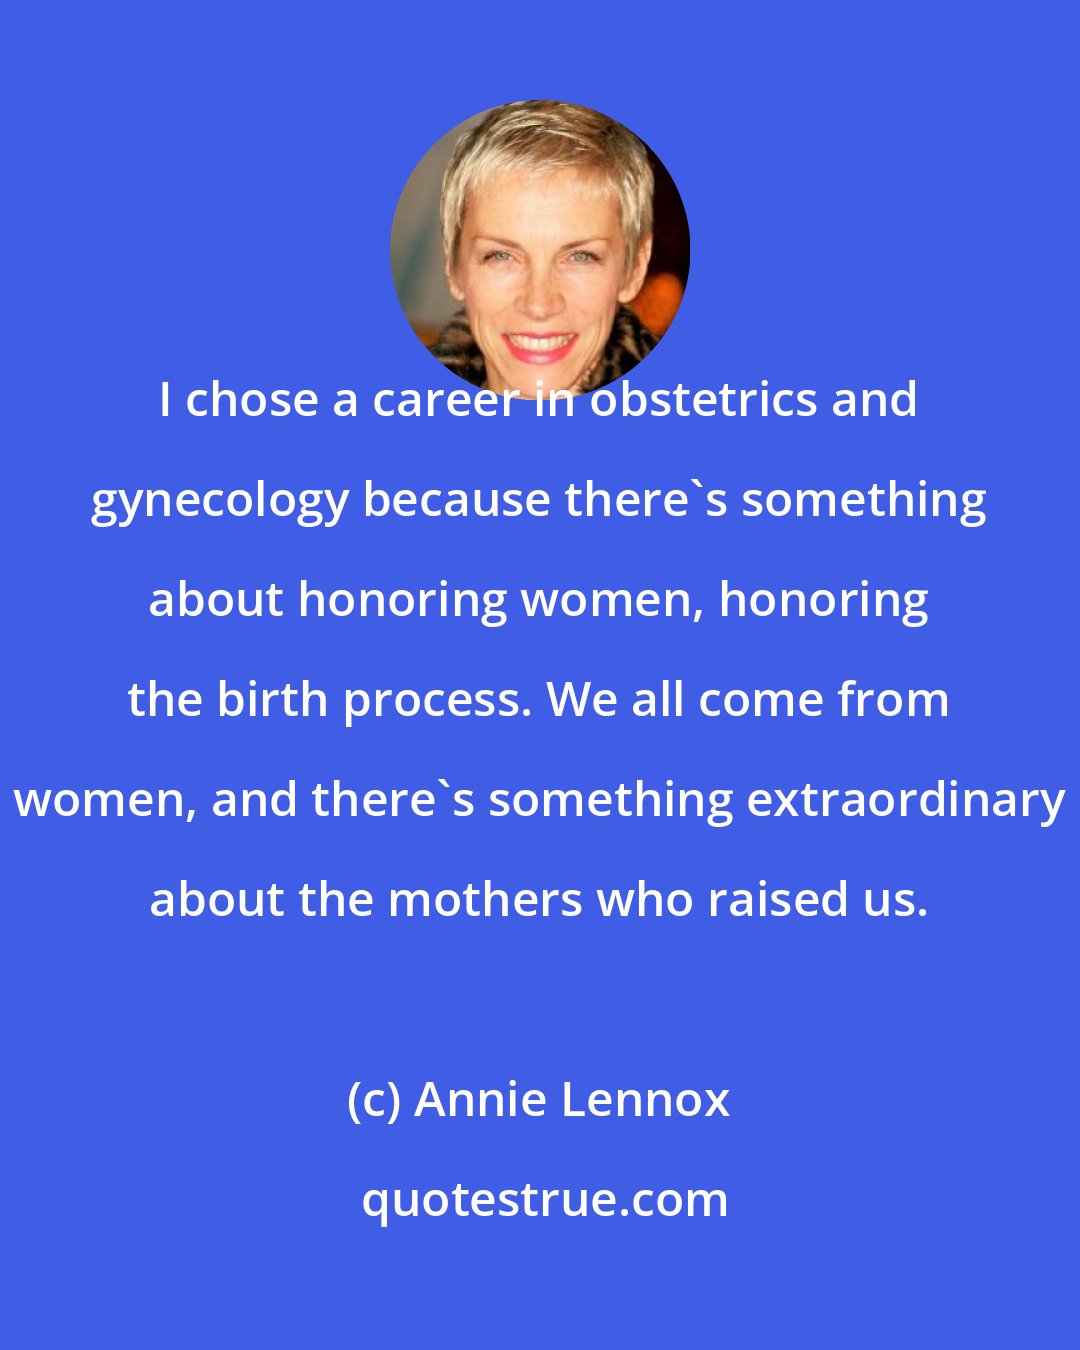 Annie Lennox: I chose a career in obstetrics and gynecology because there's something about honoring women, honoring the birth process. We all come from women, and there's something extraordinary about the mothers who raised us.